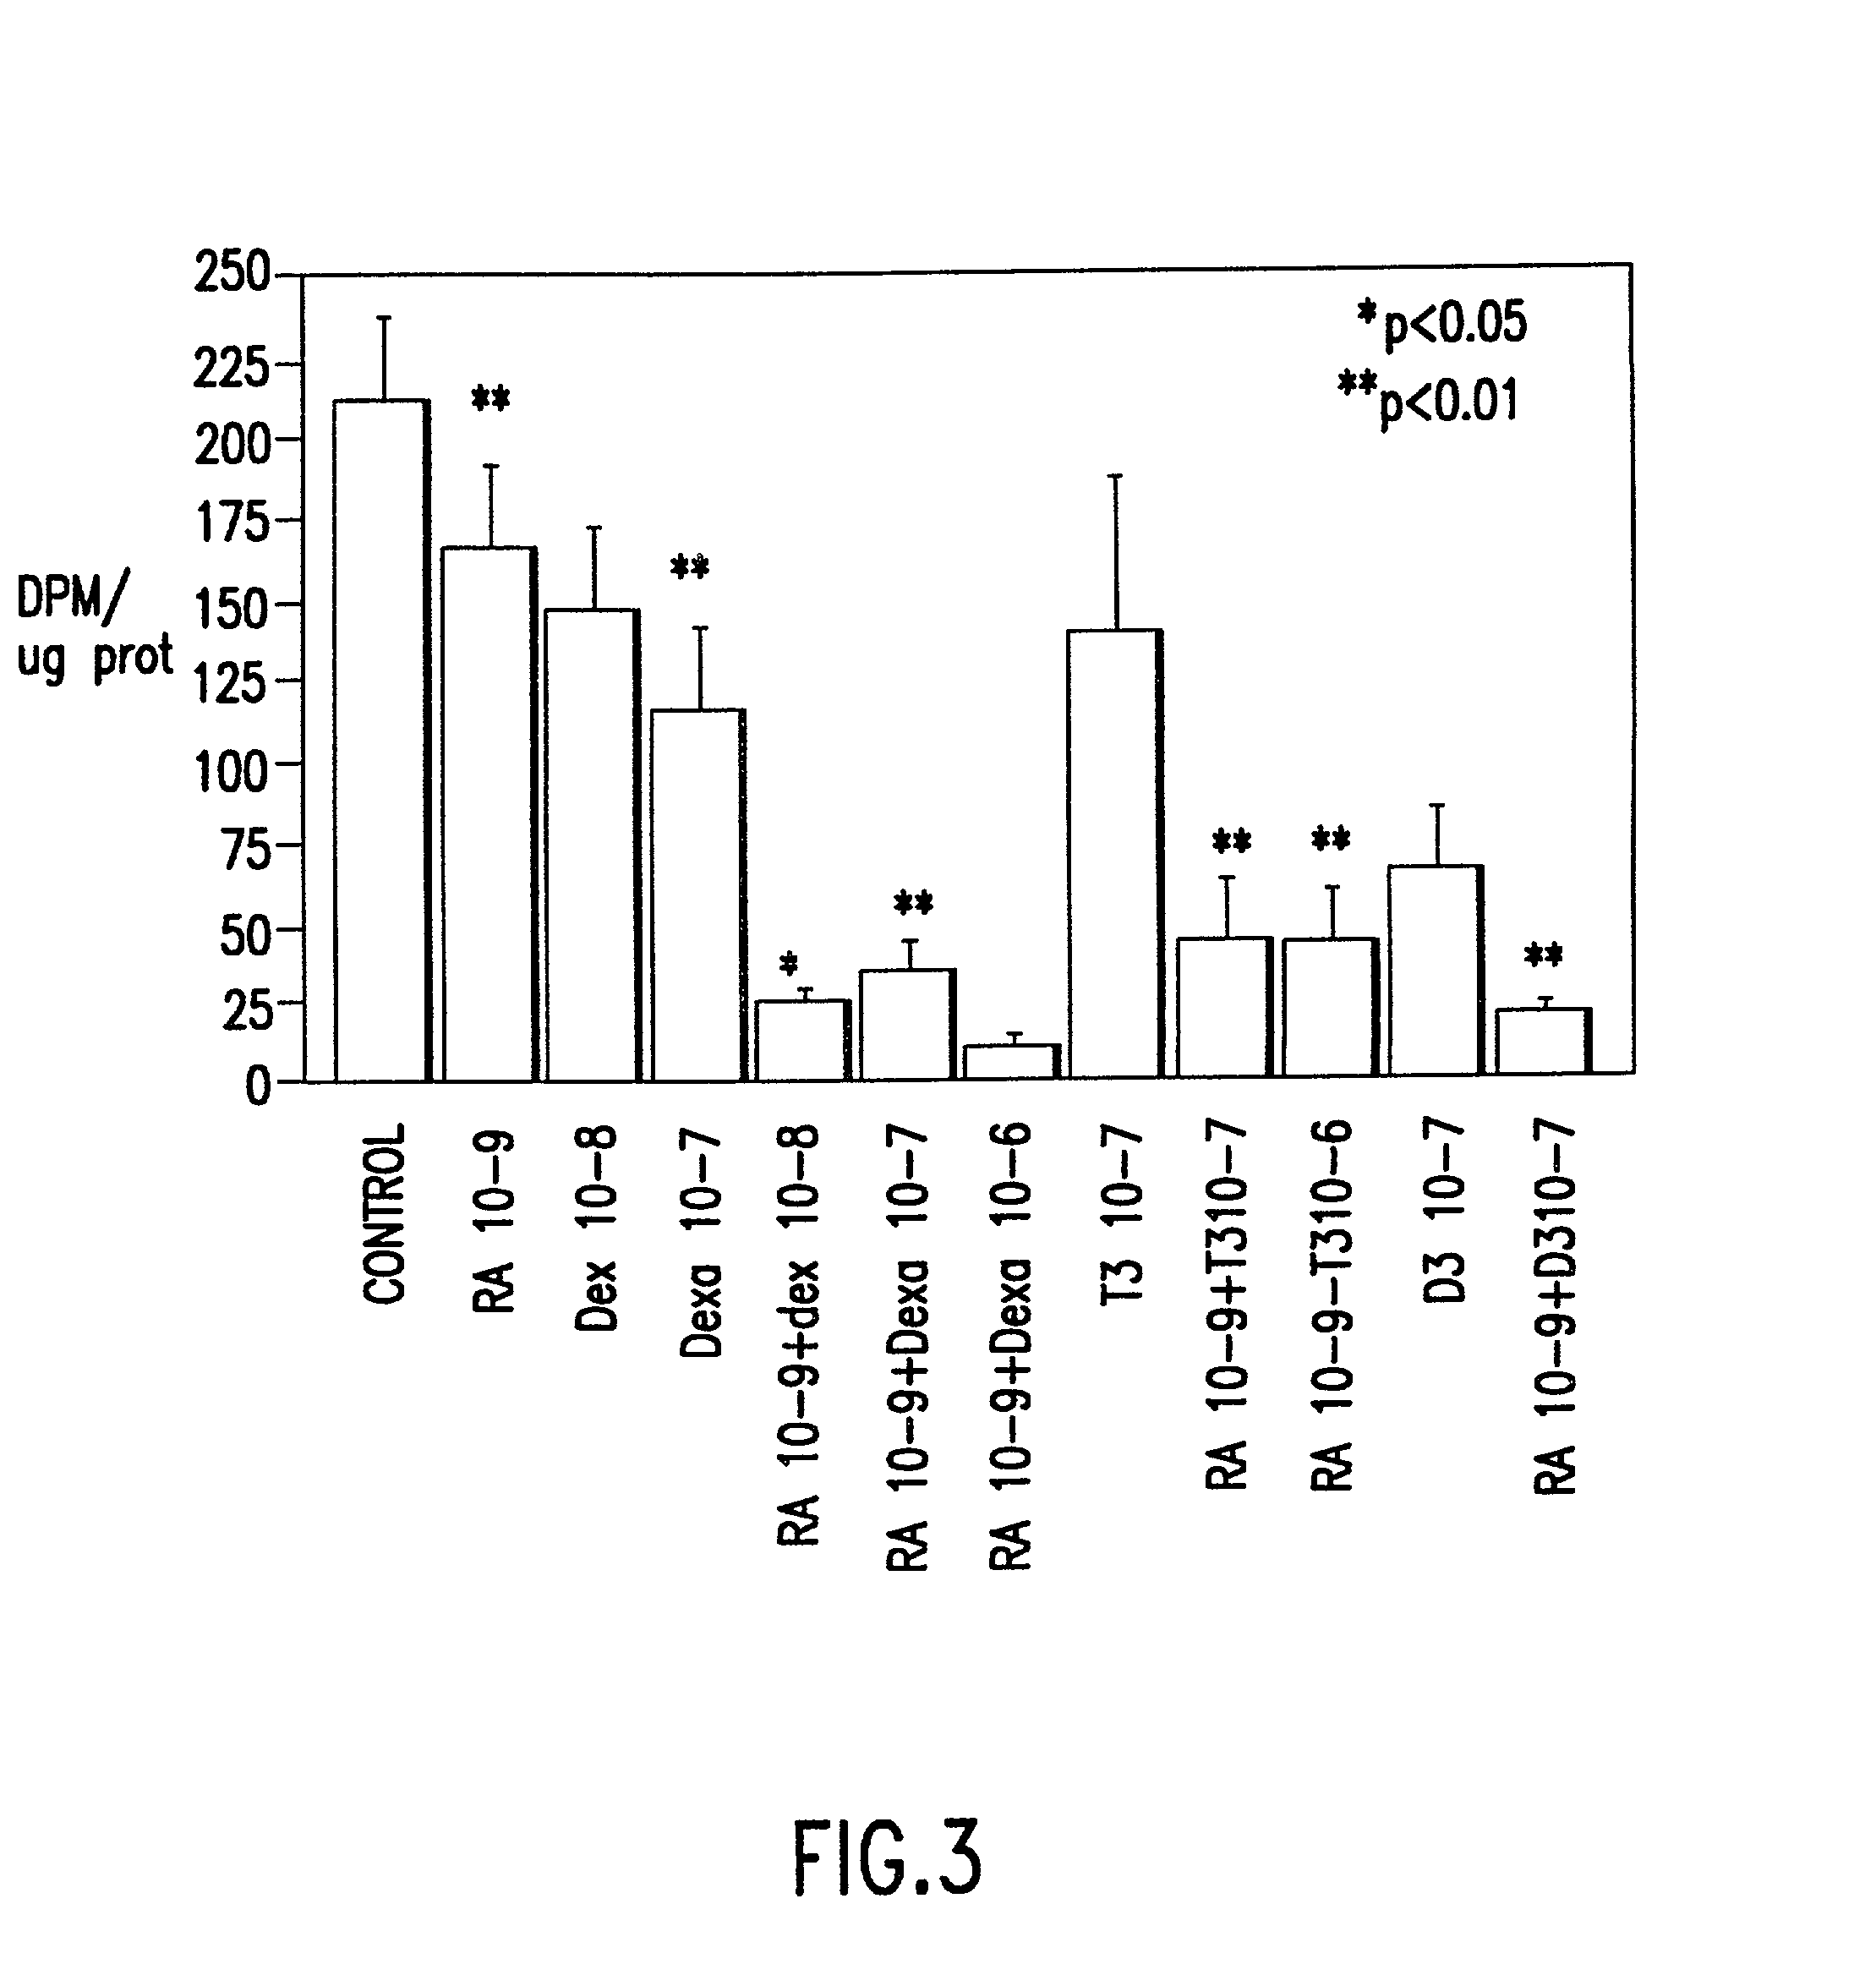 Method of preventing proliferation of retinal pigment epithelium by retinoic acid receptor agonists